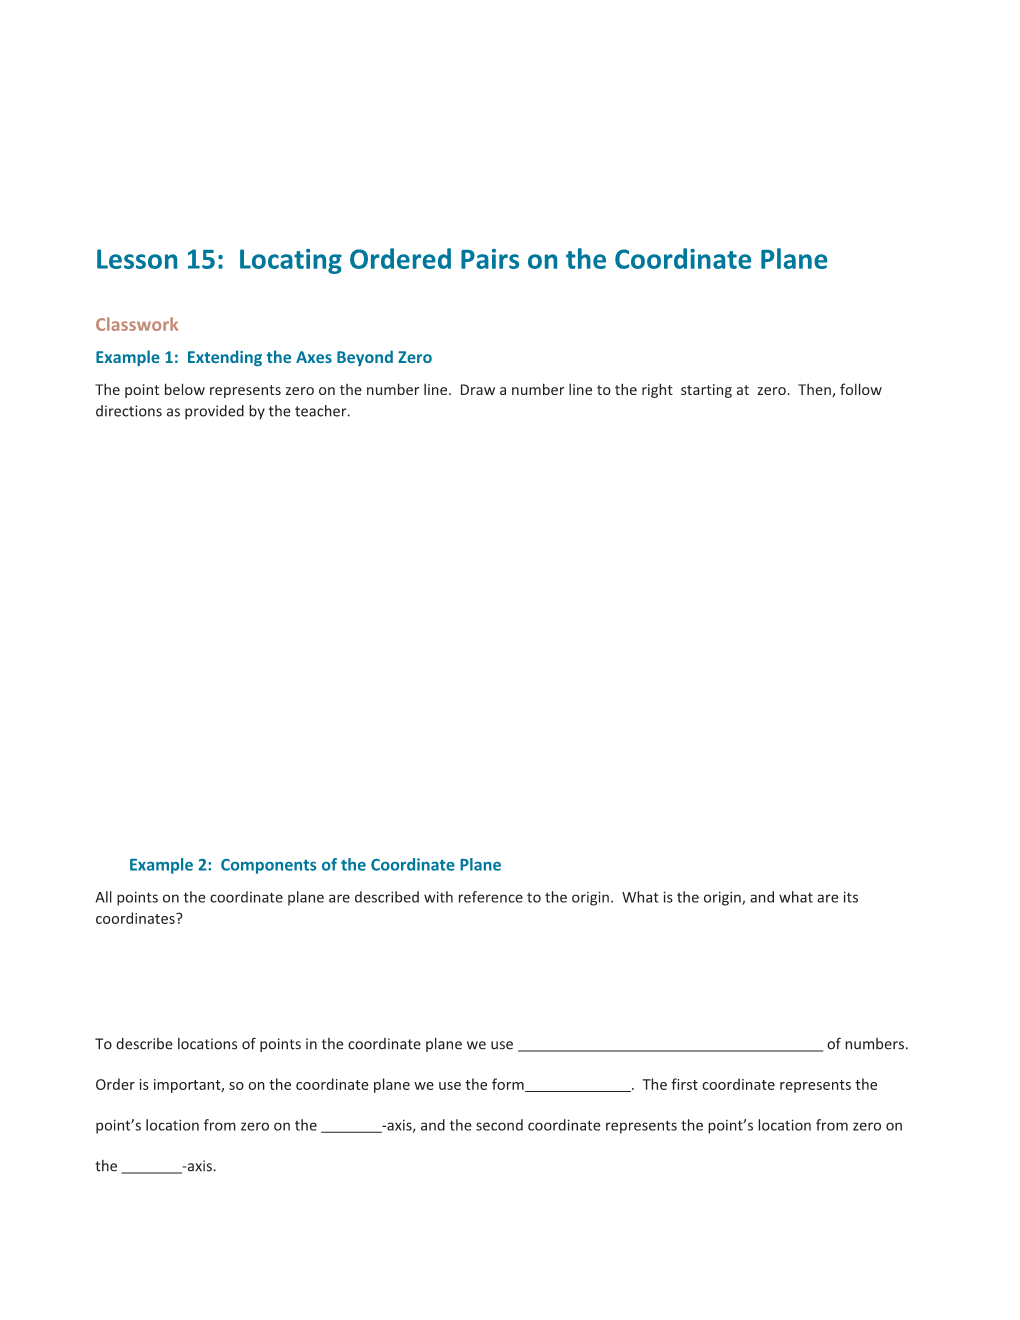 Lesson 15: Locating Ordered Pairs on the Coordinate Plane